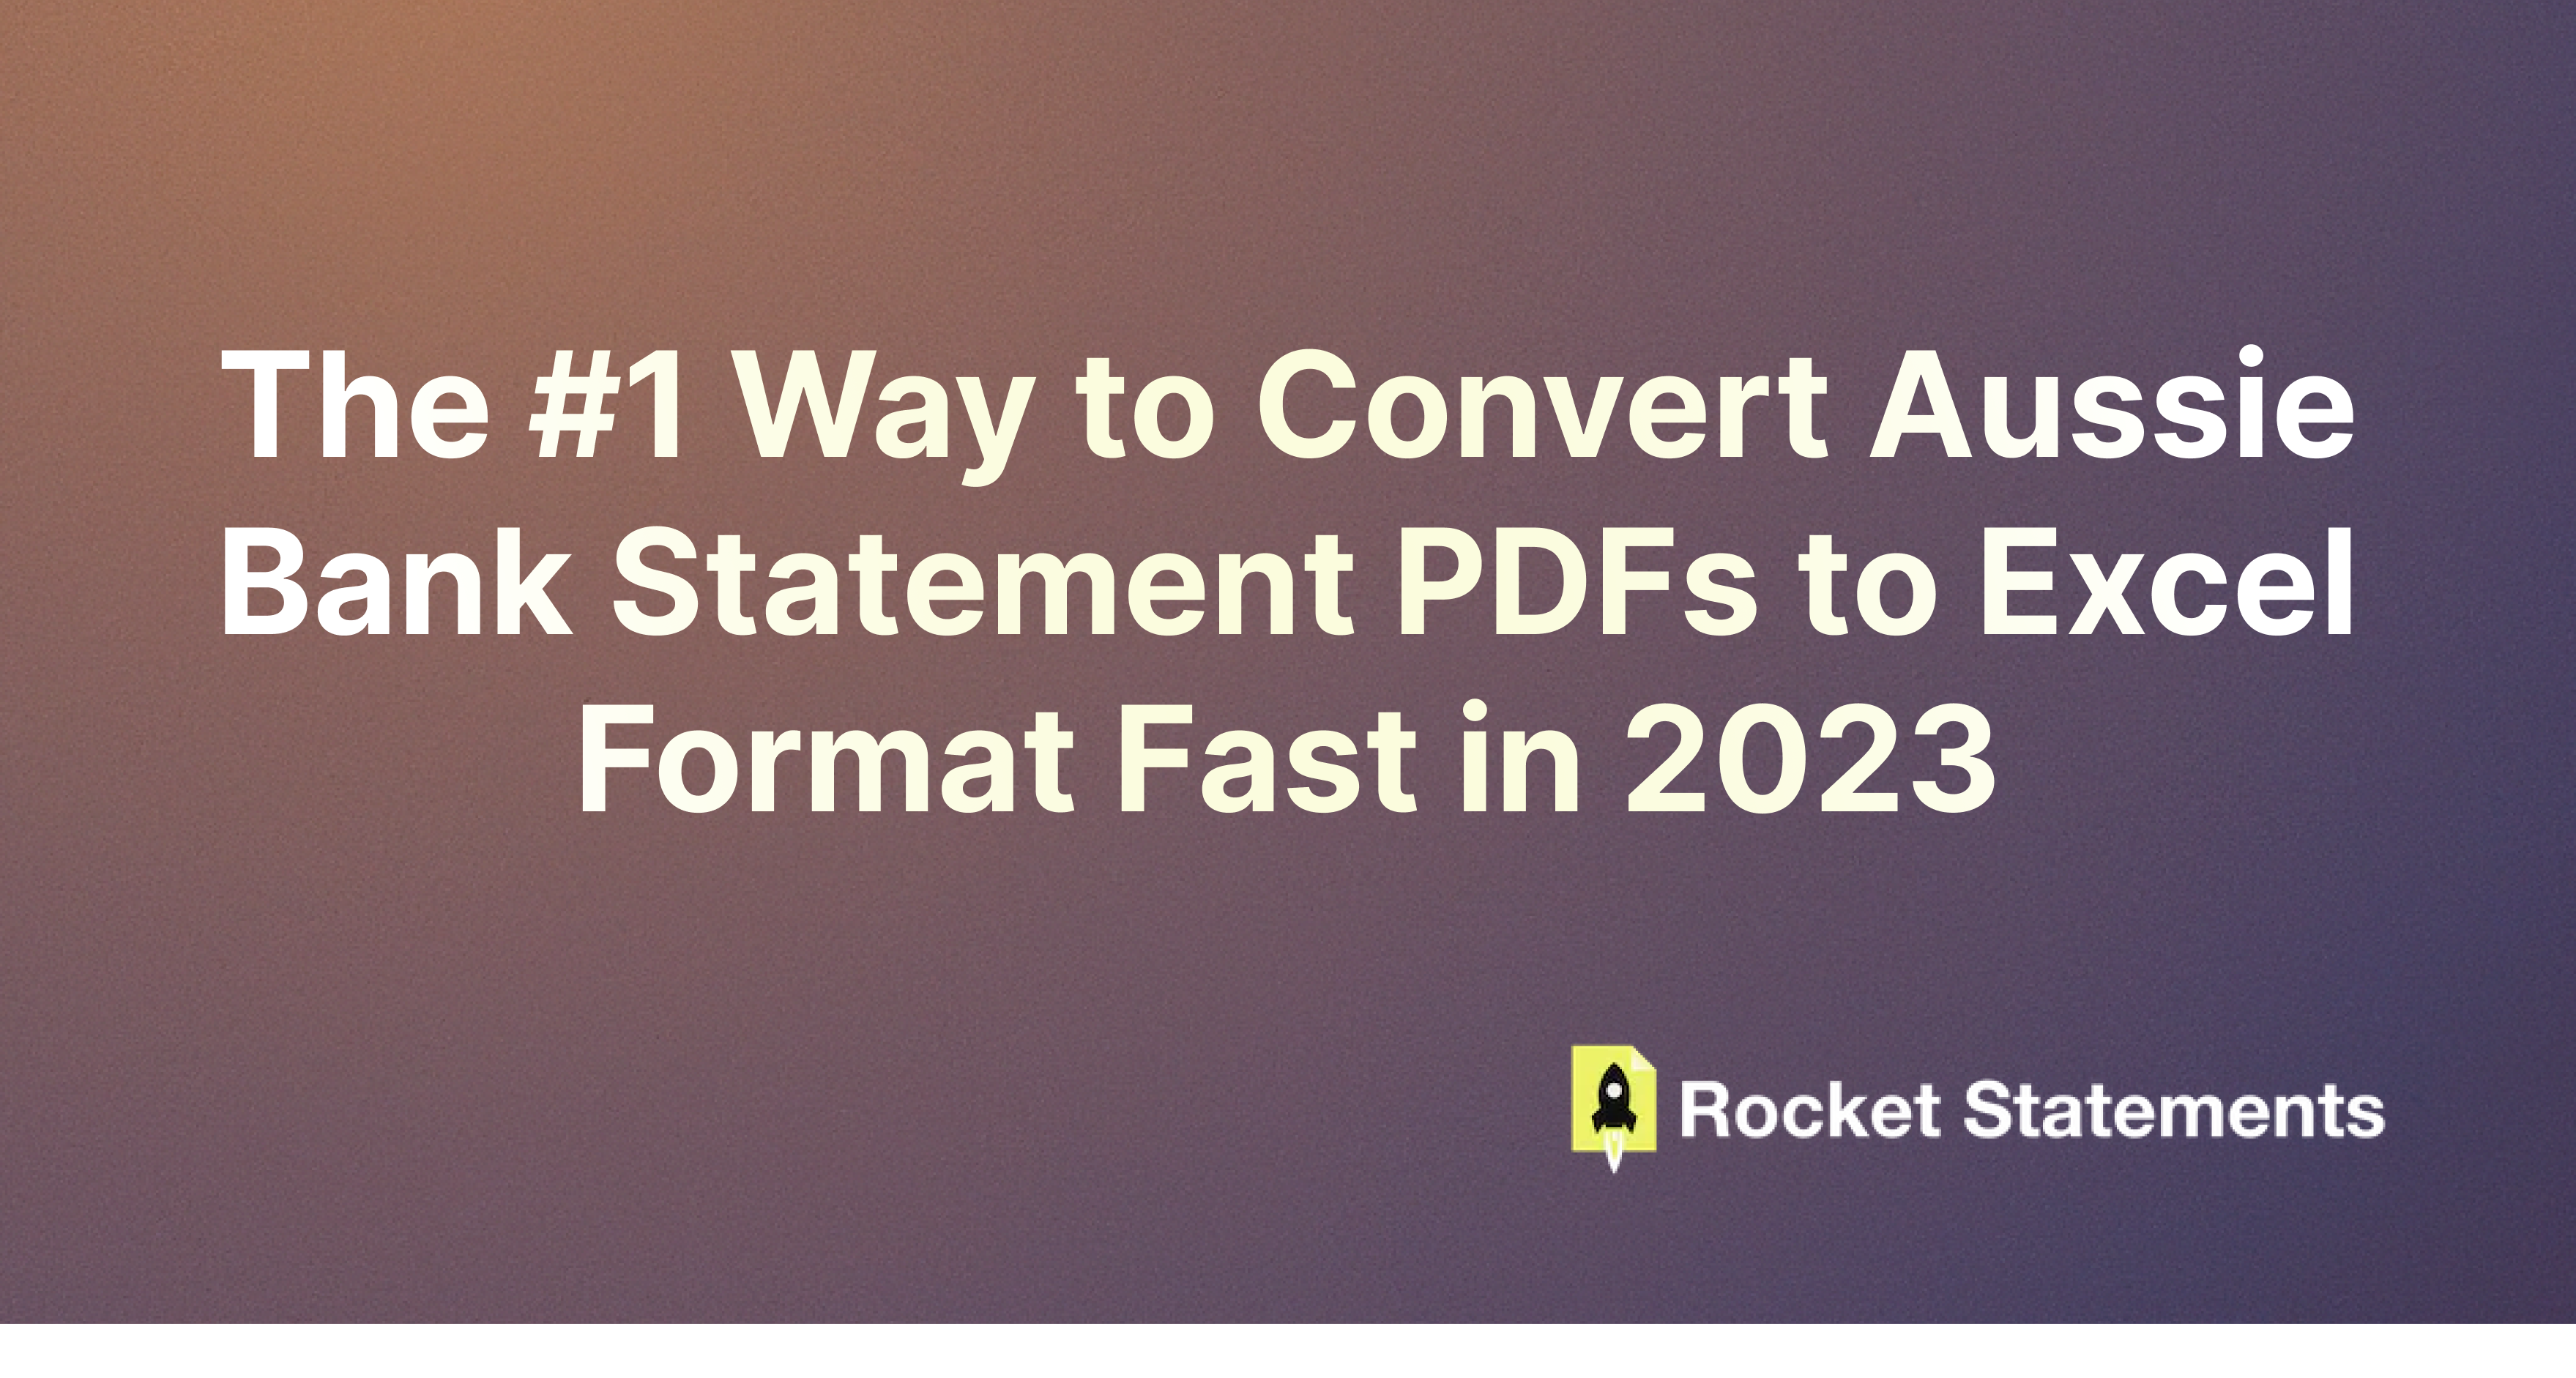 The #1 Way to Convert Aussie Bank Statement PDFs to Excel Format Fast in 2023